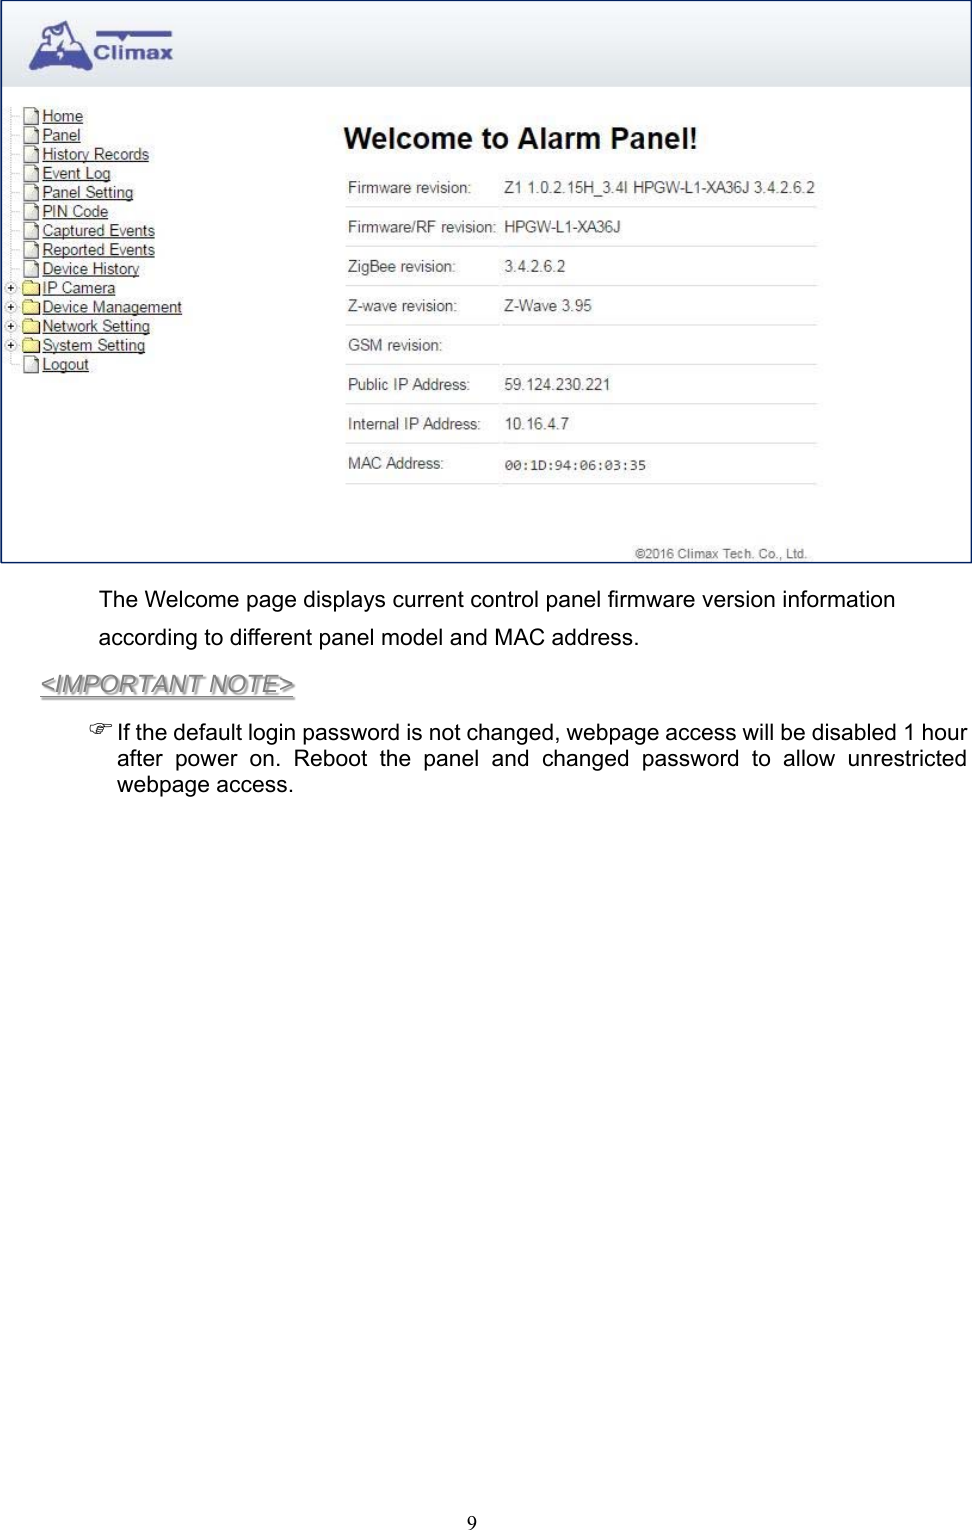  9   The Welcome page displays current control panel firmware version information according to different panel model and MAC address. &lt;IMPORTANT NOTE&gt;  If the default login password is not changed, webpage access will be disabled 1 hour after  power  on.  Reboot  the  panel  and  changed  password  to  allow  unrestricted webpage access.    